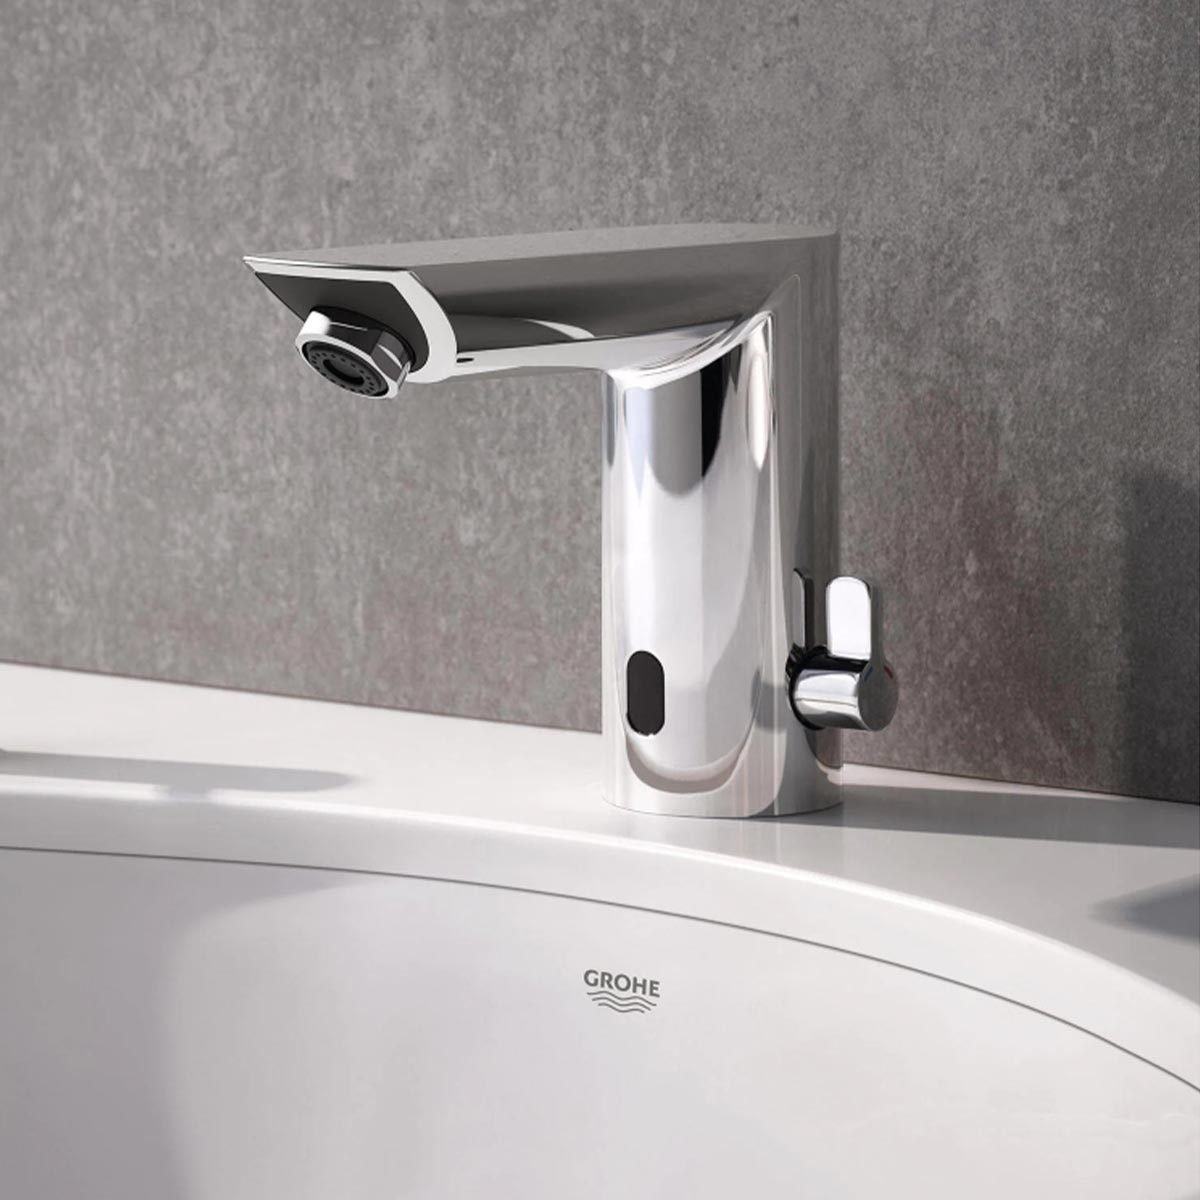 Buyers Guide To Touchless Bathroom Faucets ?resize=700%2C700